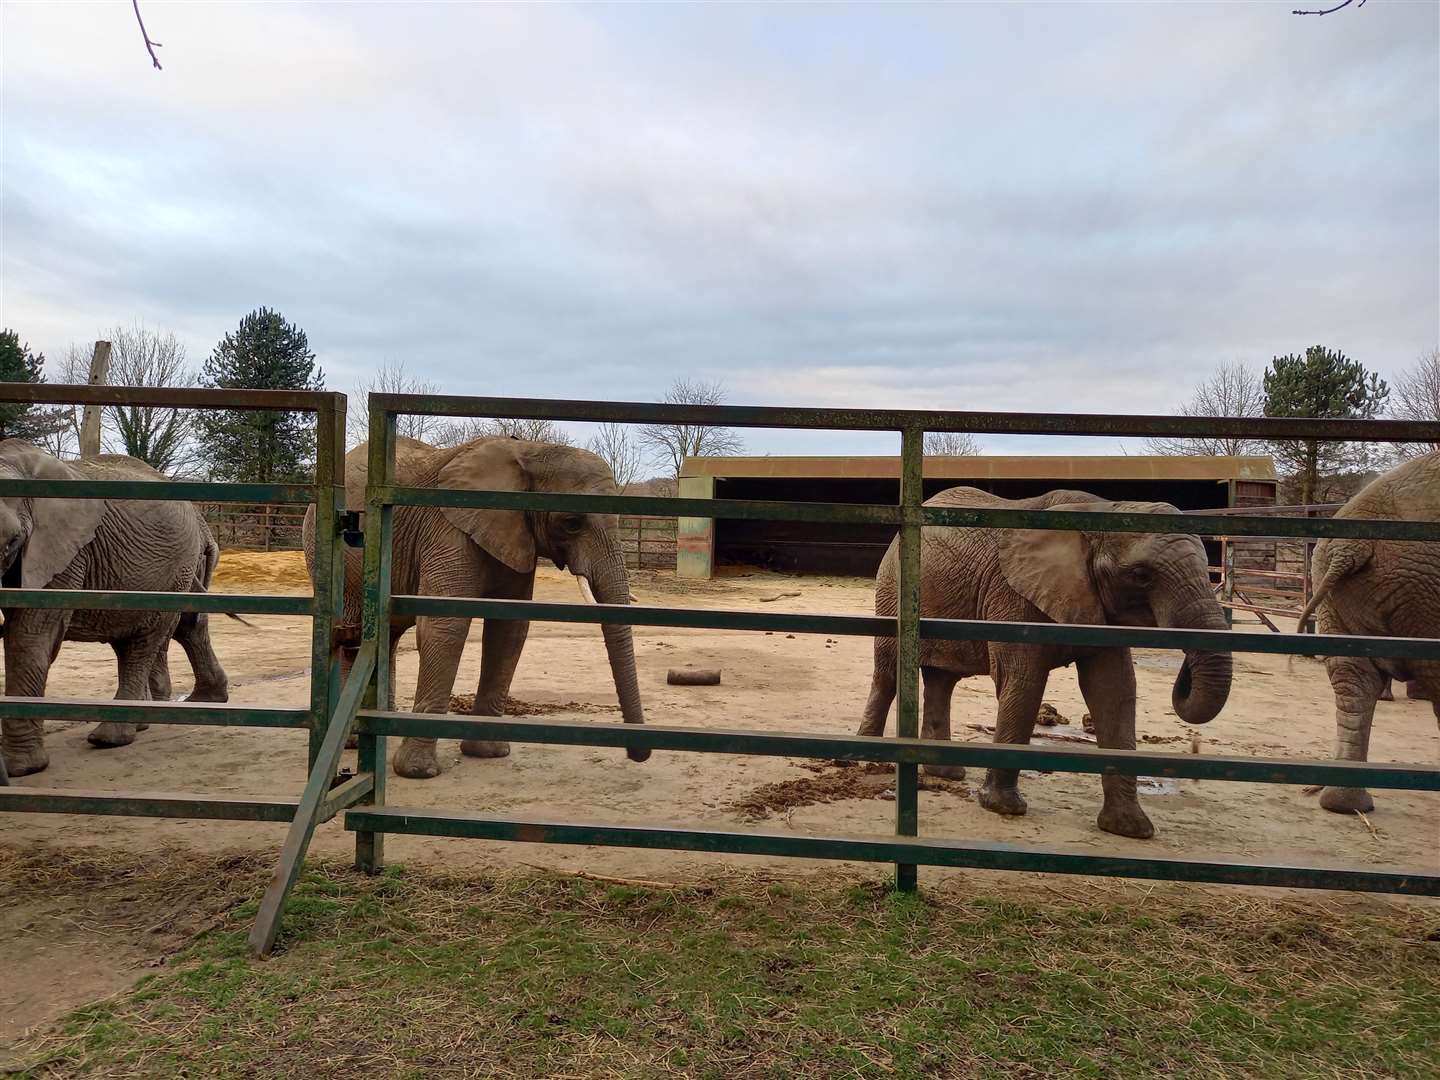 Elephants have been at Howletts for decades, but come the summer, the enclosure will be empty